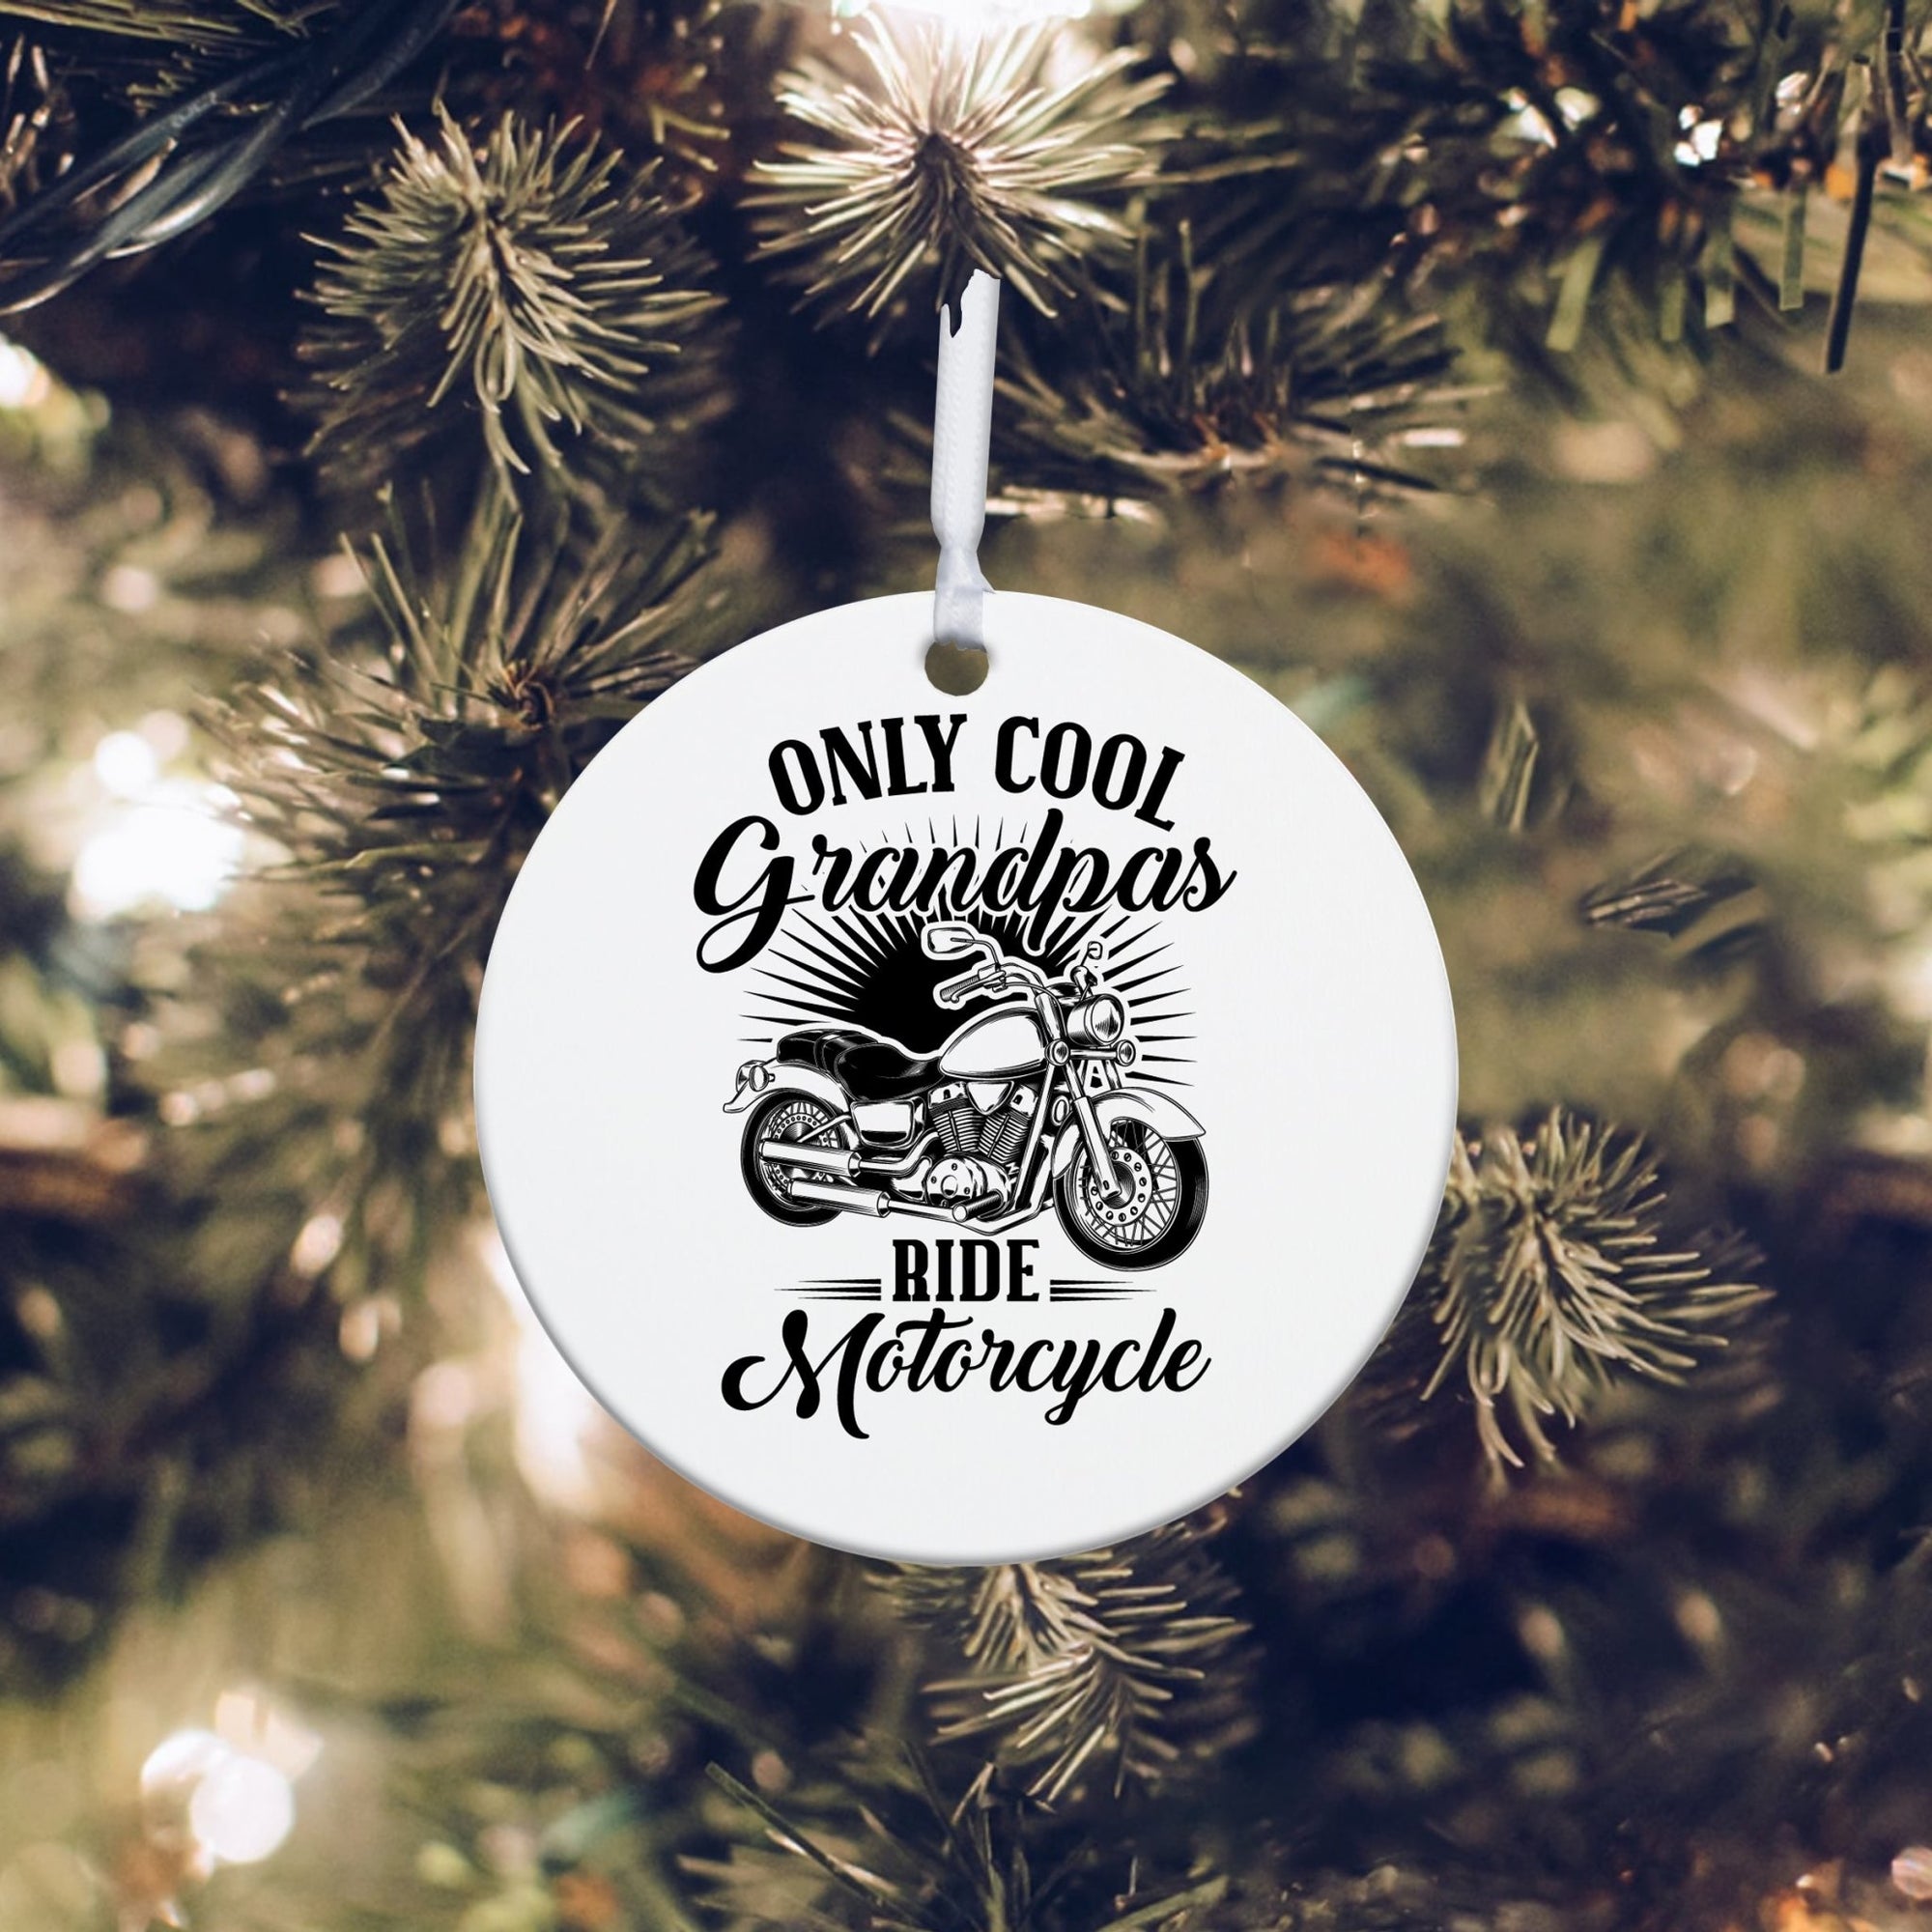 Grandparents White Ornament With Inspirational Message Gift Ideas - Only Cool Grandpas Ride Motorcycle - LifeSong Milestones